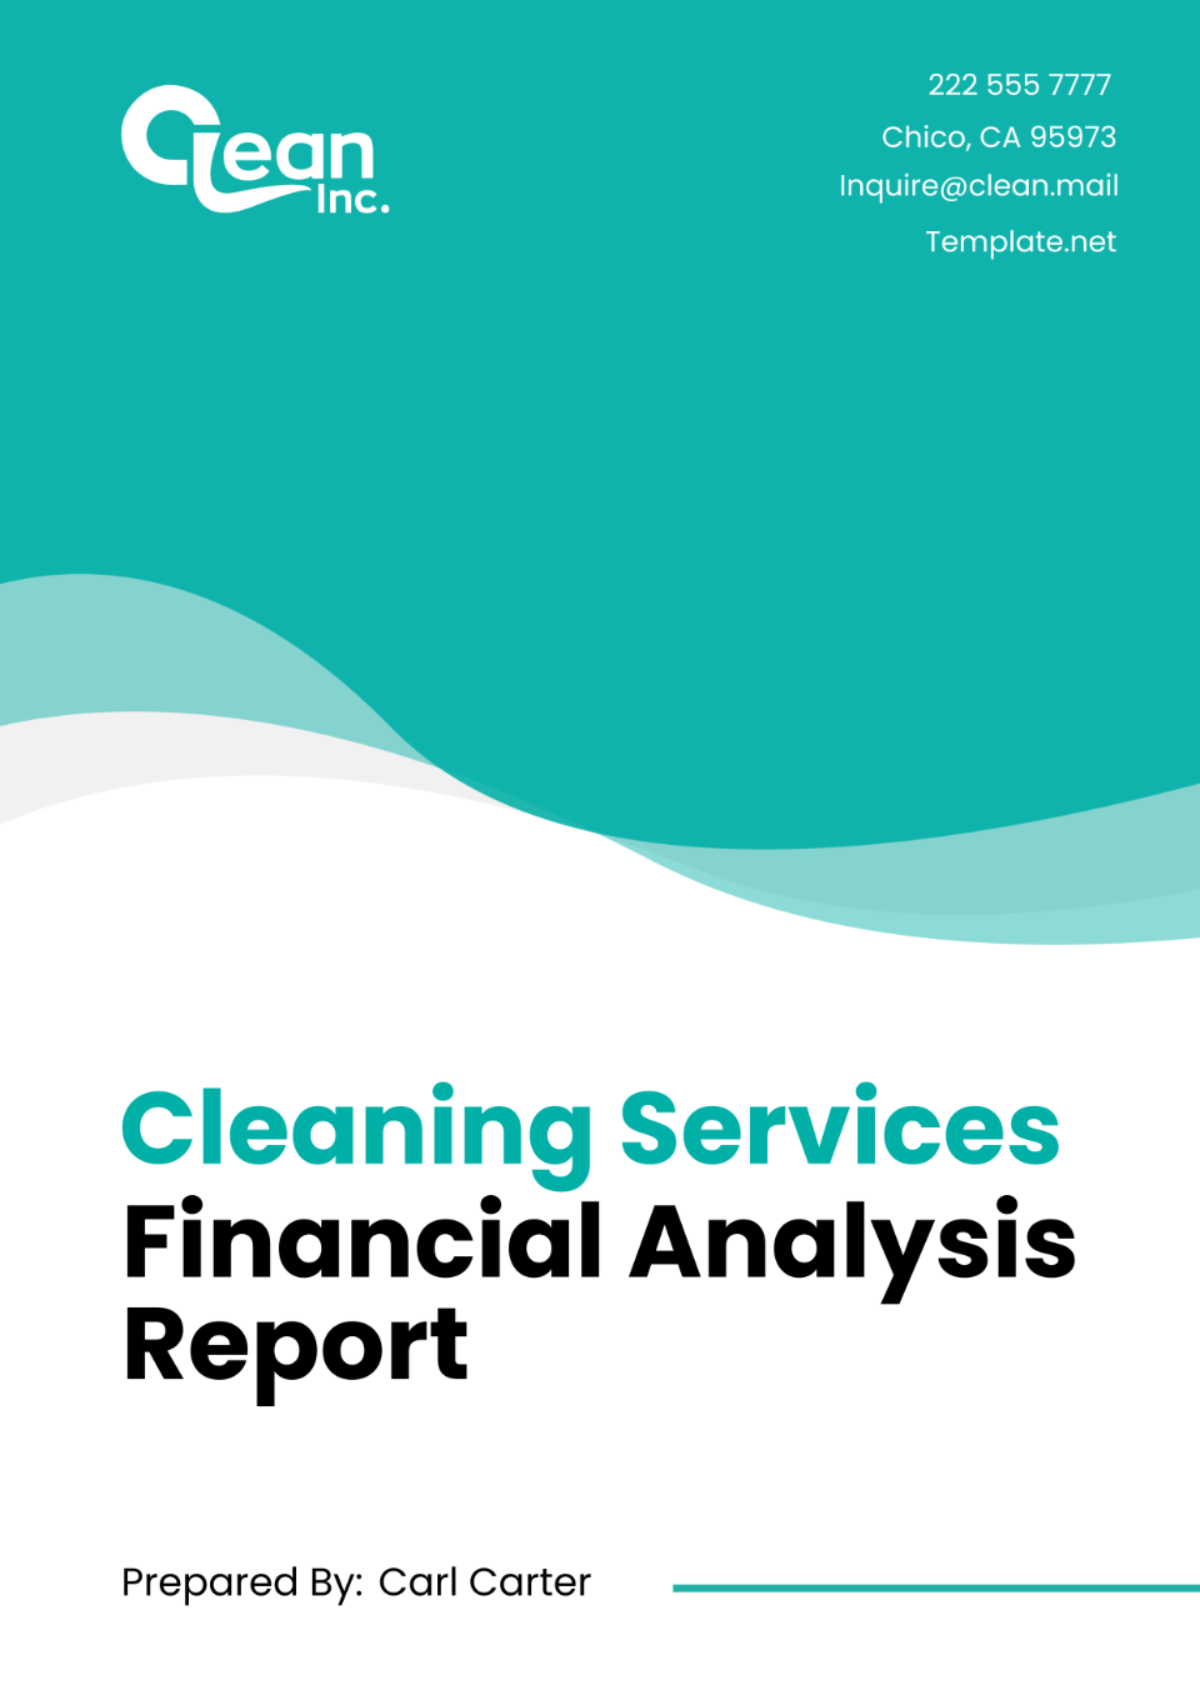 Cleaning Services Financial Analysis Report Template